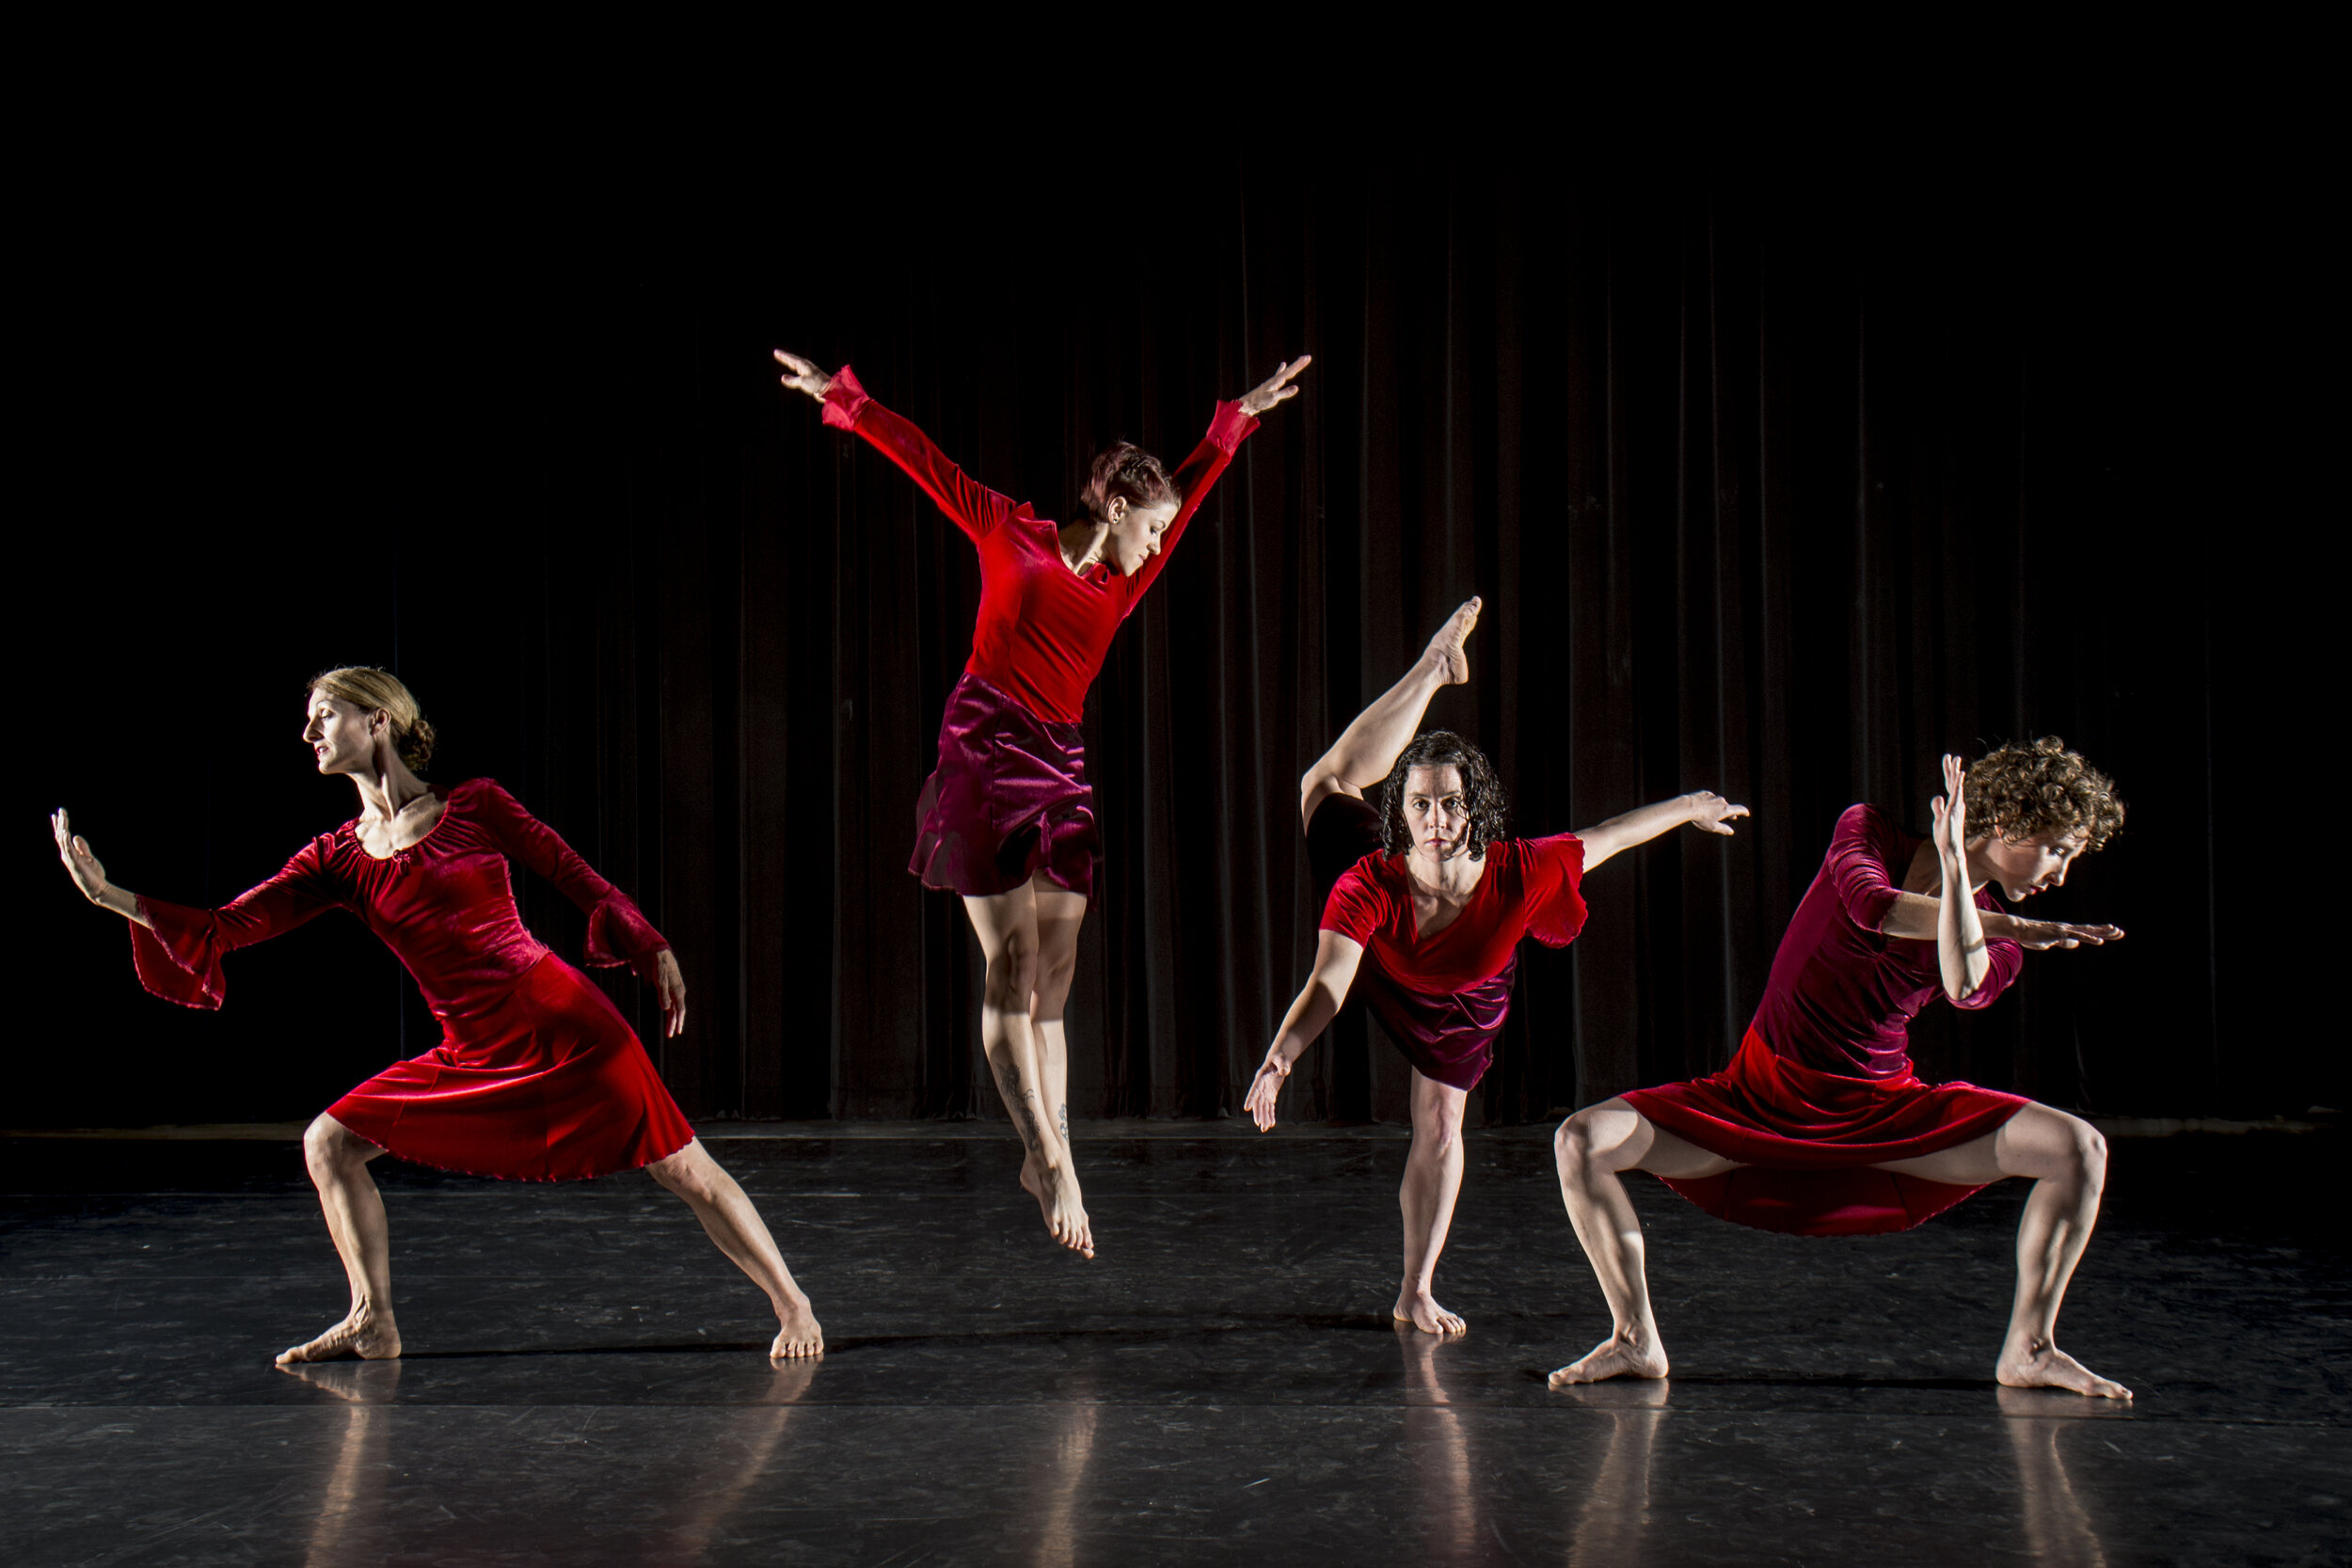 Company Dancers Moving on Stage in Red